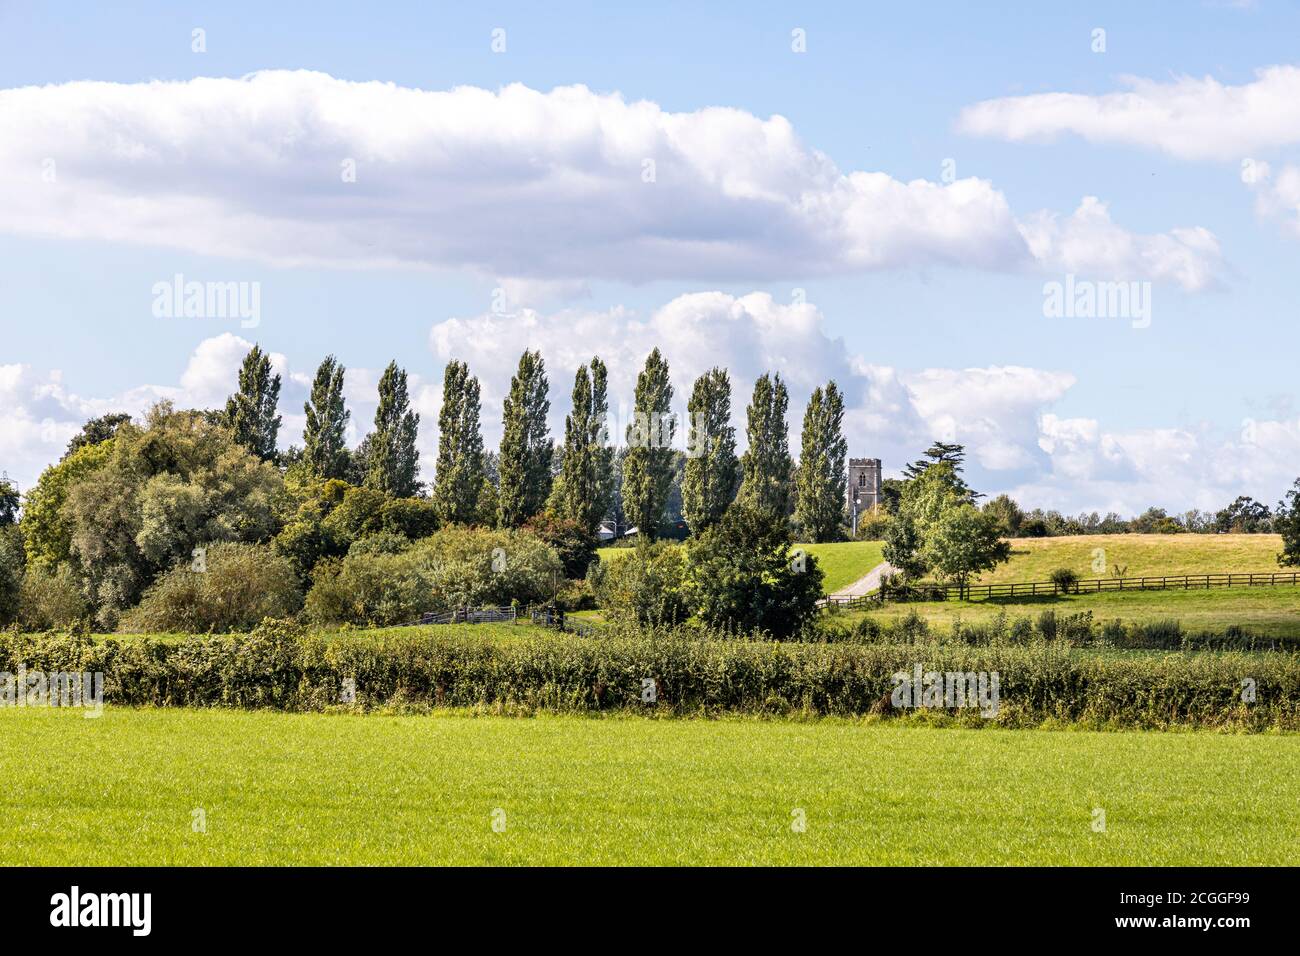 A row of poplar trees and the church tower in the Severn Vale village of Maisemore, Gloucestershire UK Stock Photo